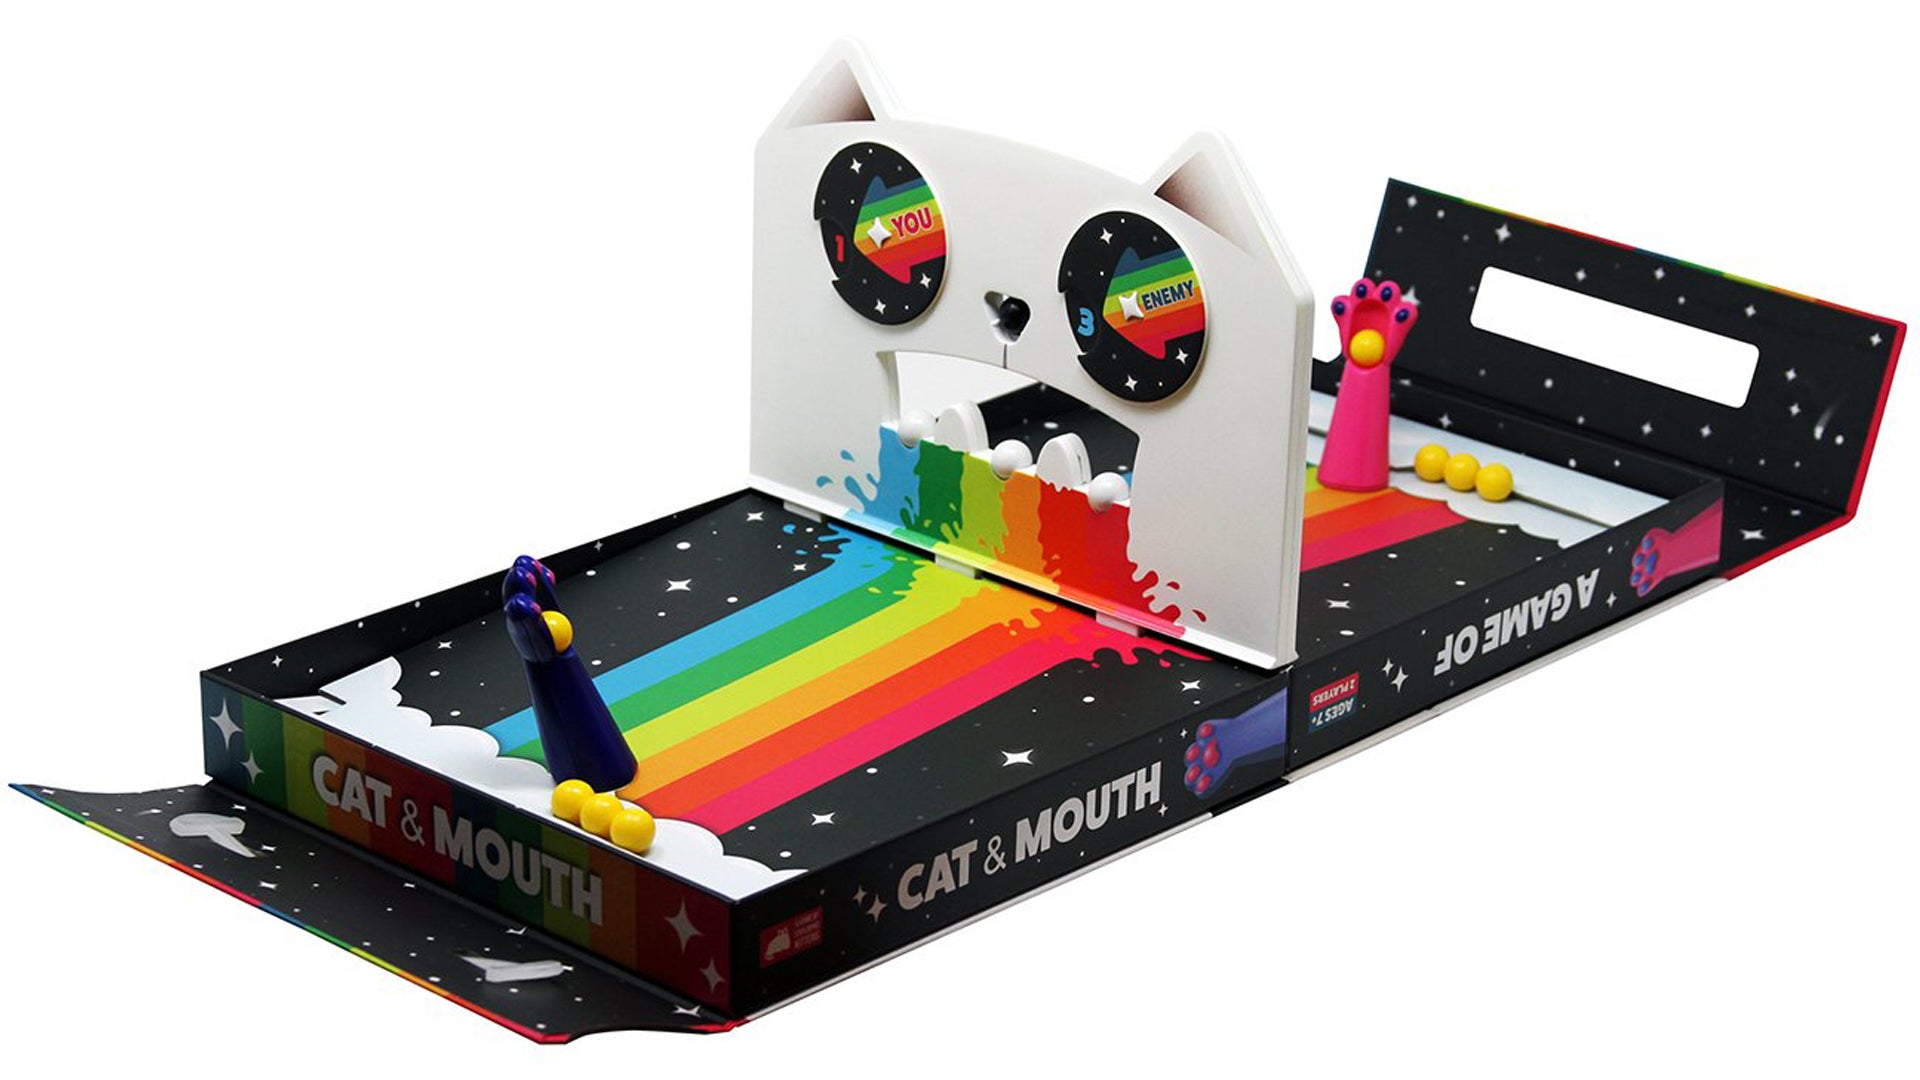 Exploding Kittens studios next game is about shooting balls through a cats mouth